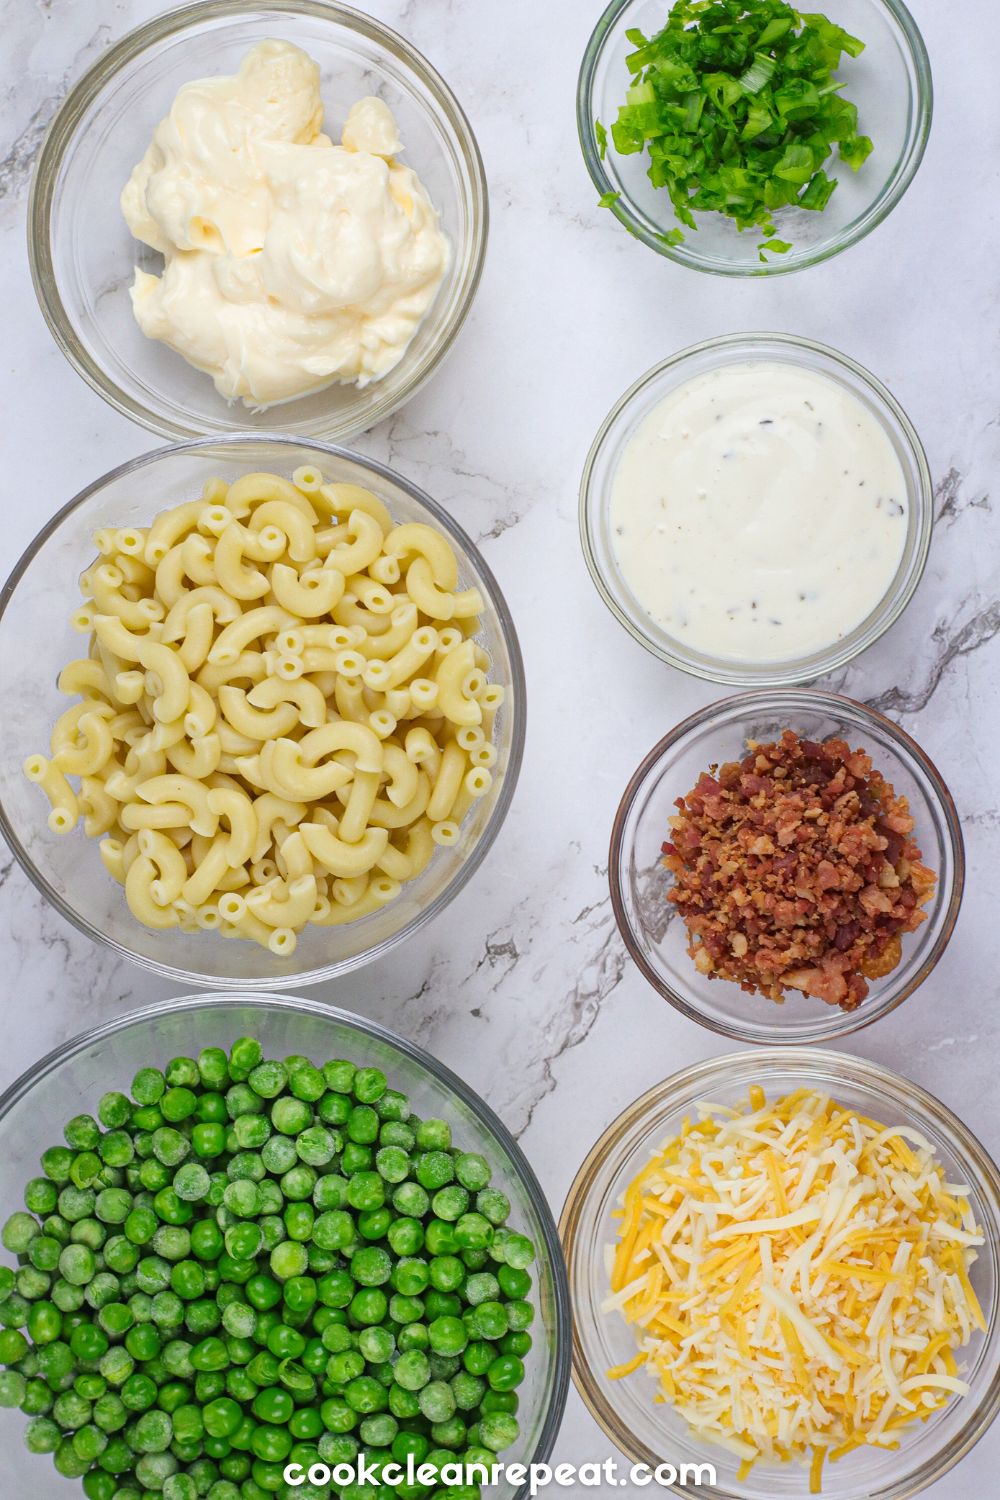 ingredients needed to make this pea and pasta salad